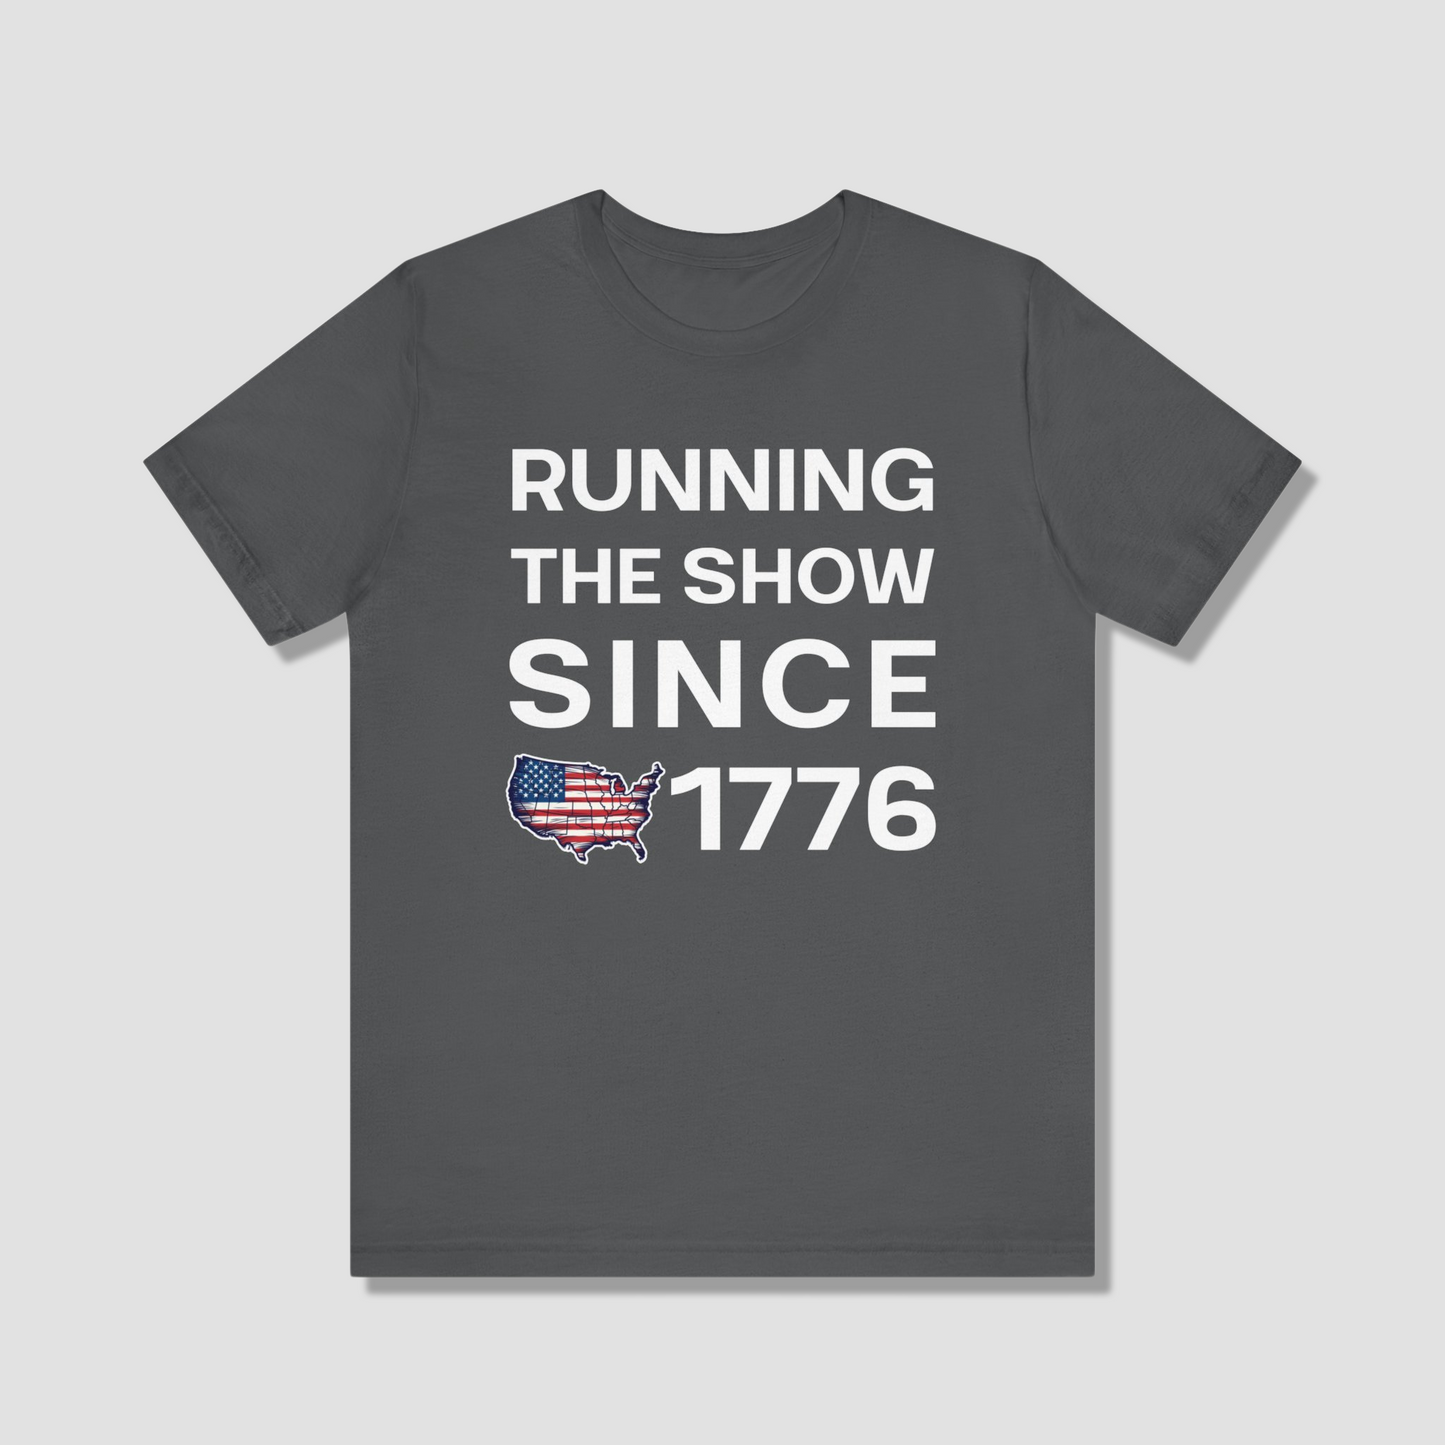 Running the Show Since 1776 Tee